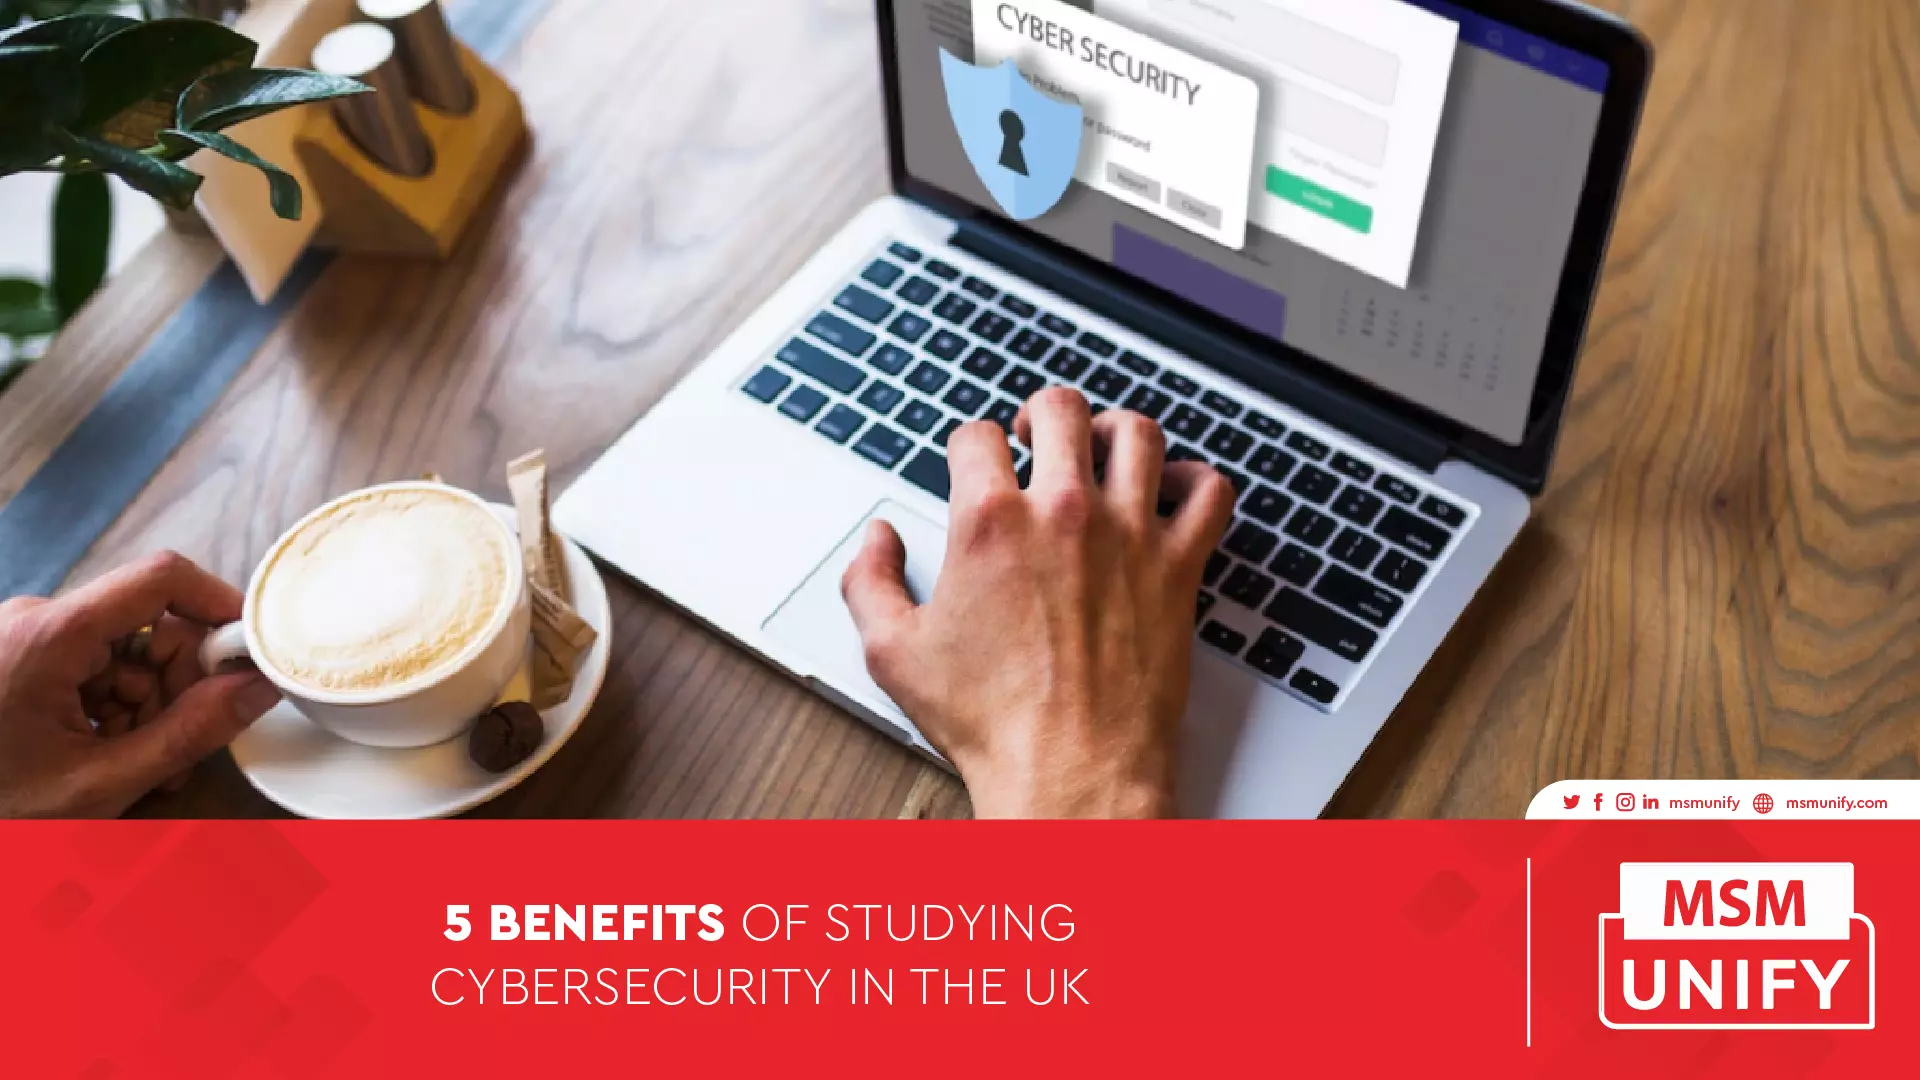 MSM Unify 5 Benefits of Studying Cybersecurity in the UK